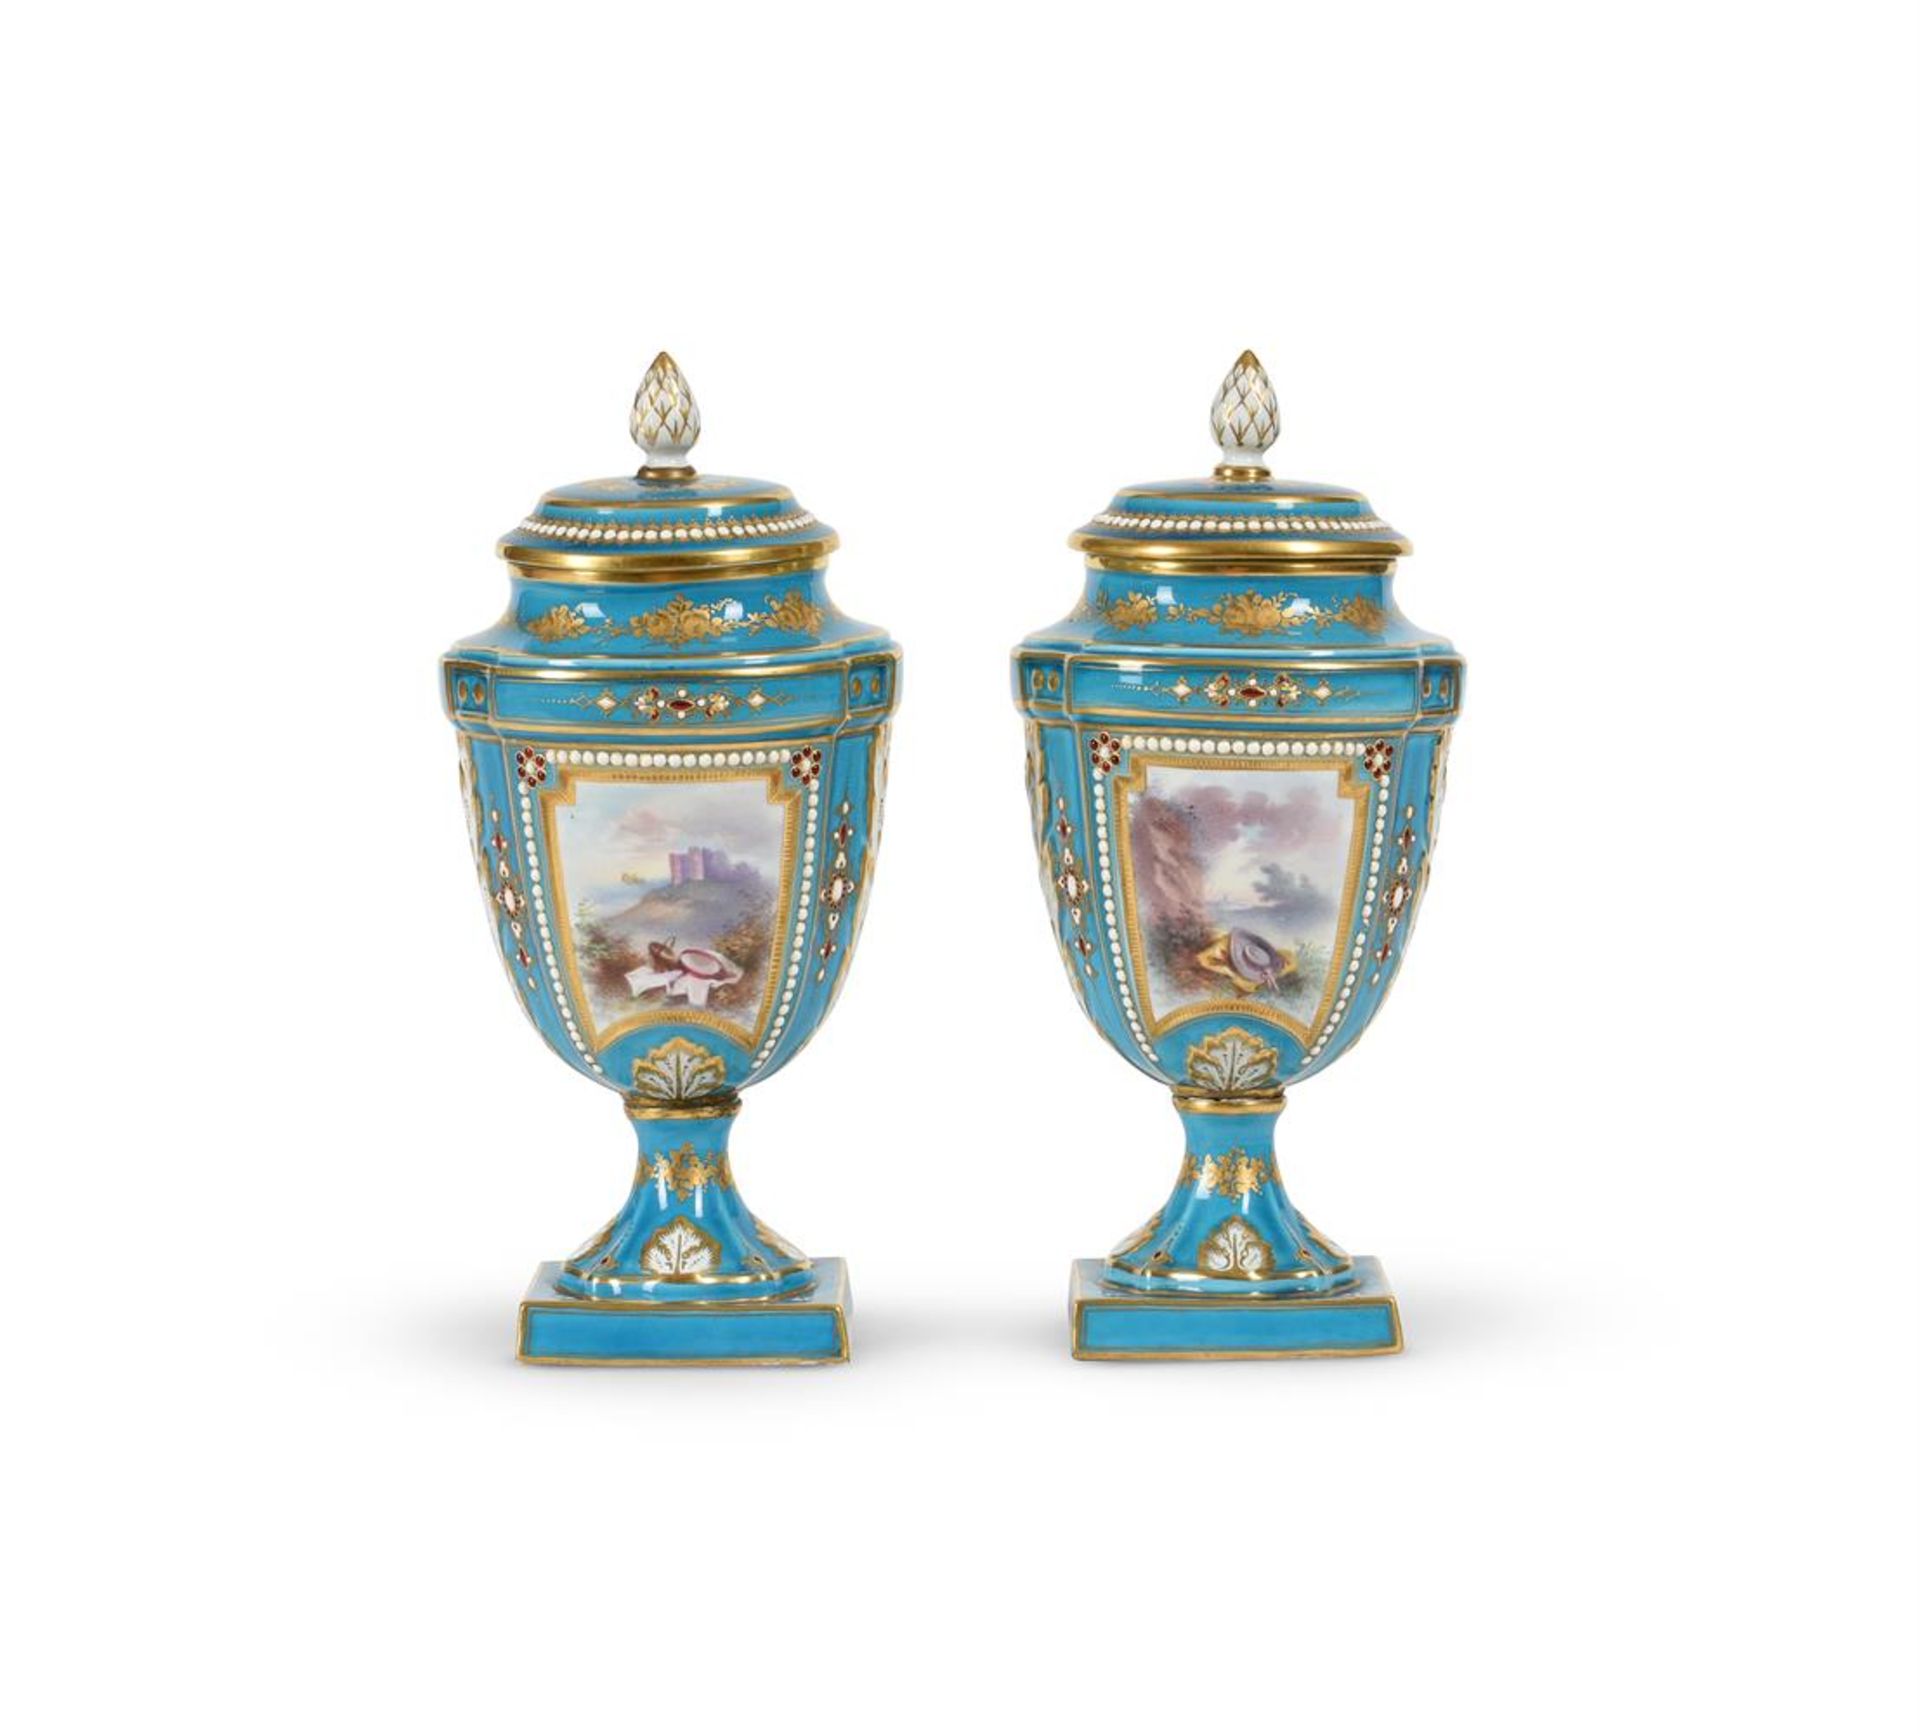 A PAIR OF SEVRES-STYLE TURQUOISE-GROUND PORCELAIN URNS AND COVERS, LATE 19TH CENTURY - Image 2 of 3